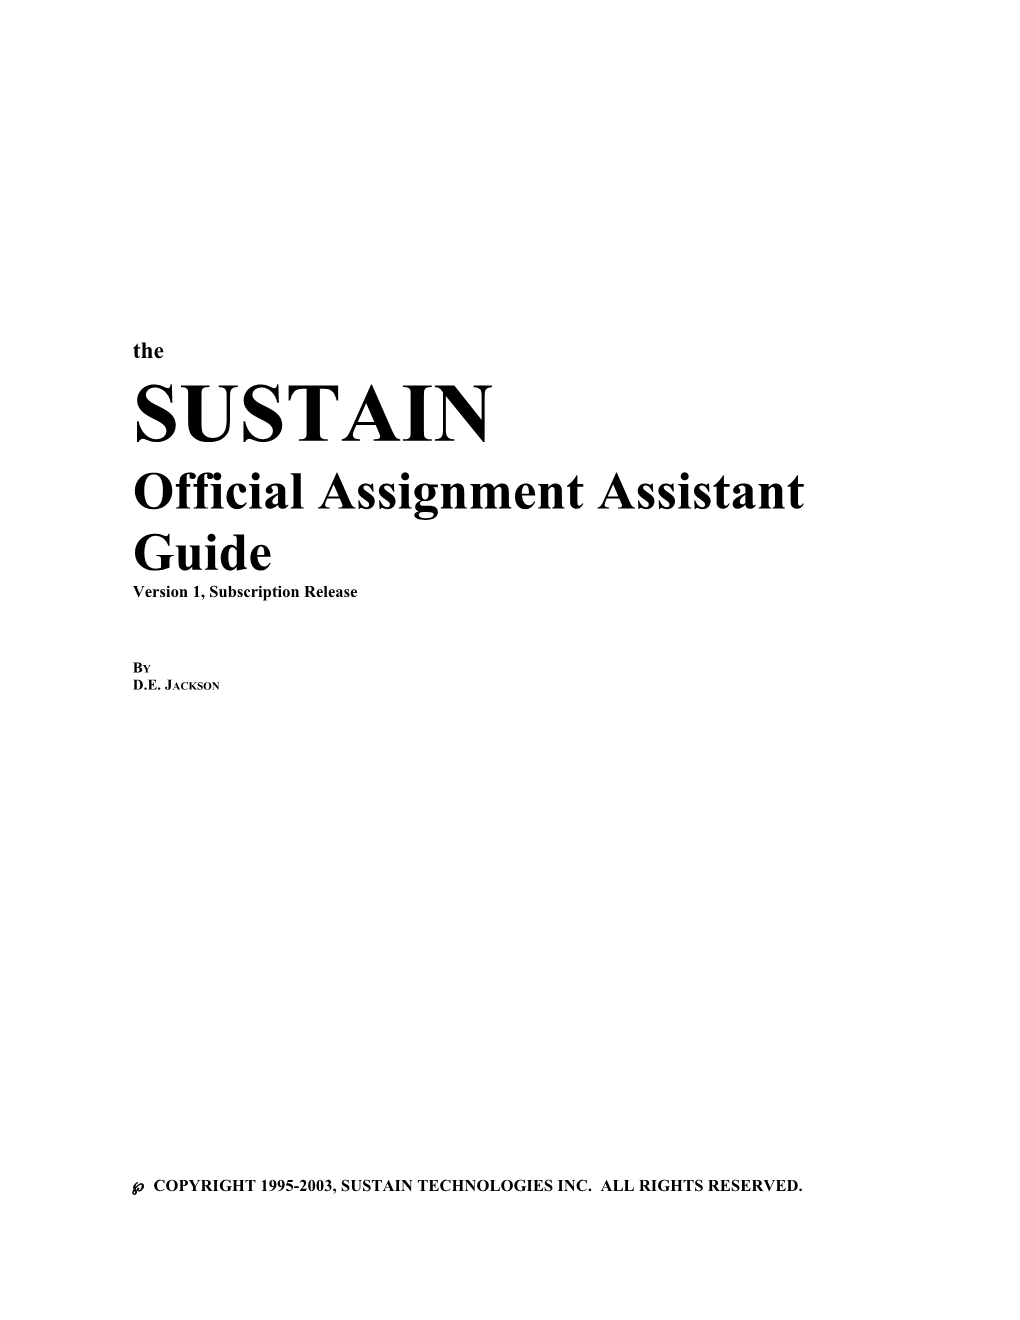 The SUSTAIN Official Assignment Assistant Guide